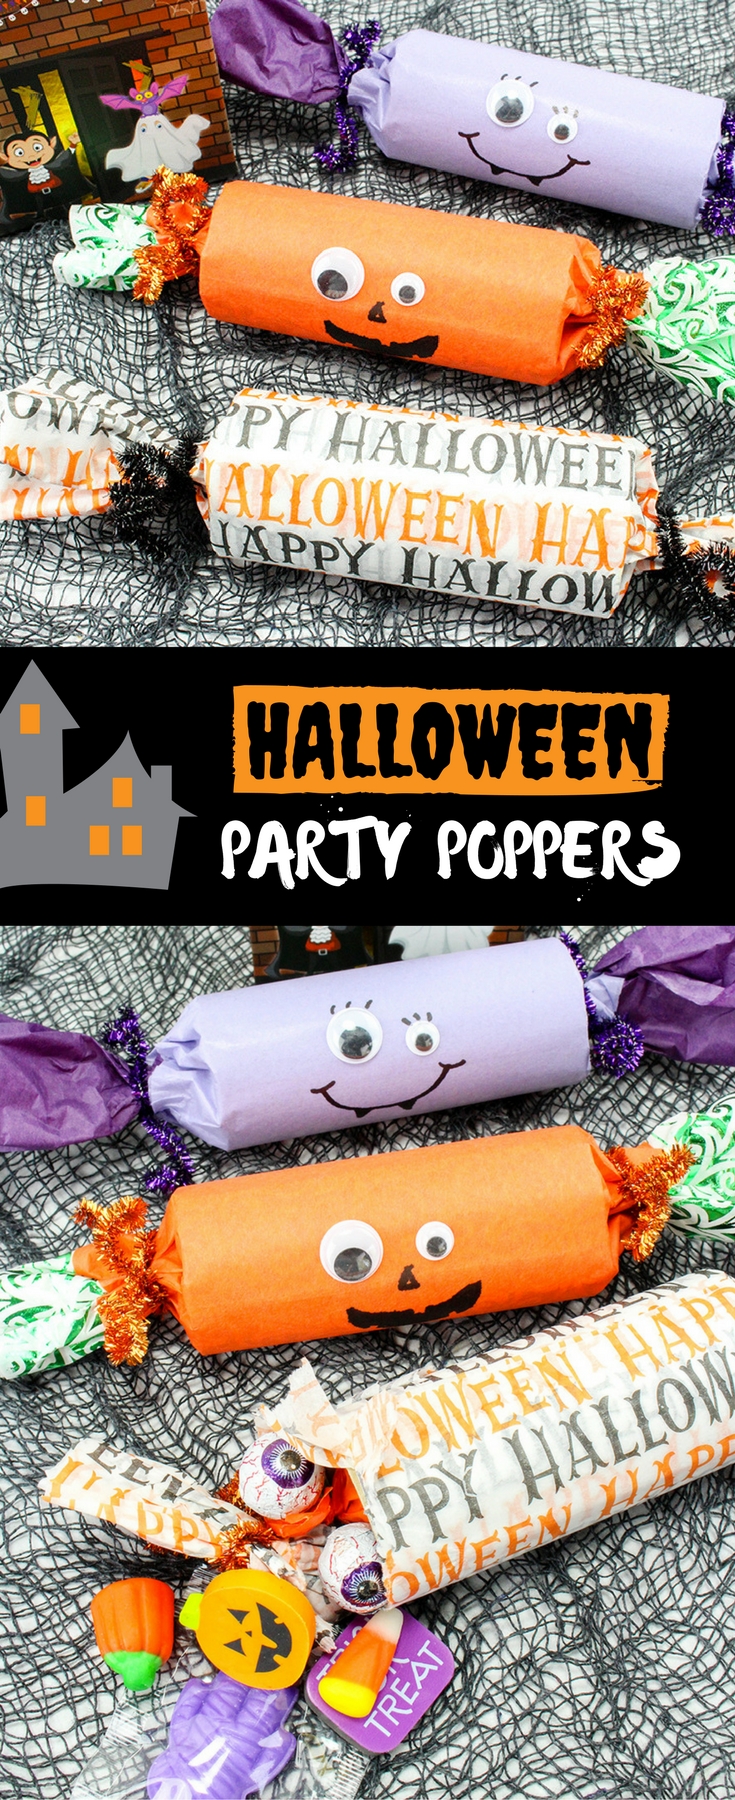 Halloween party poppers make trick or treating more fun with hidden candy and partie goodies